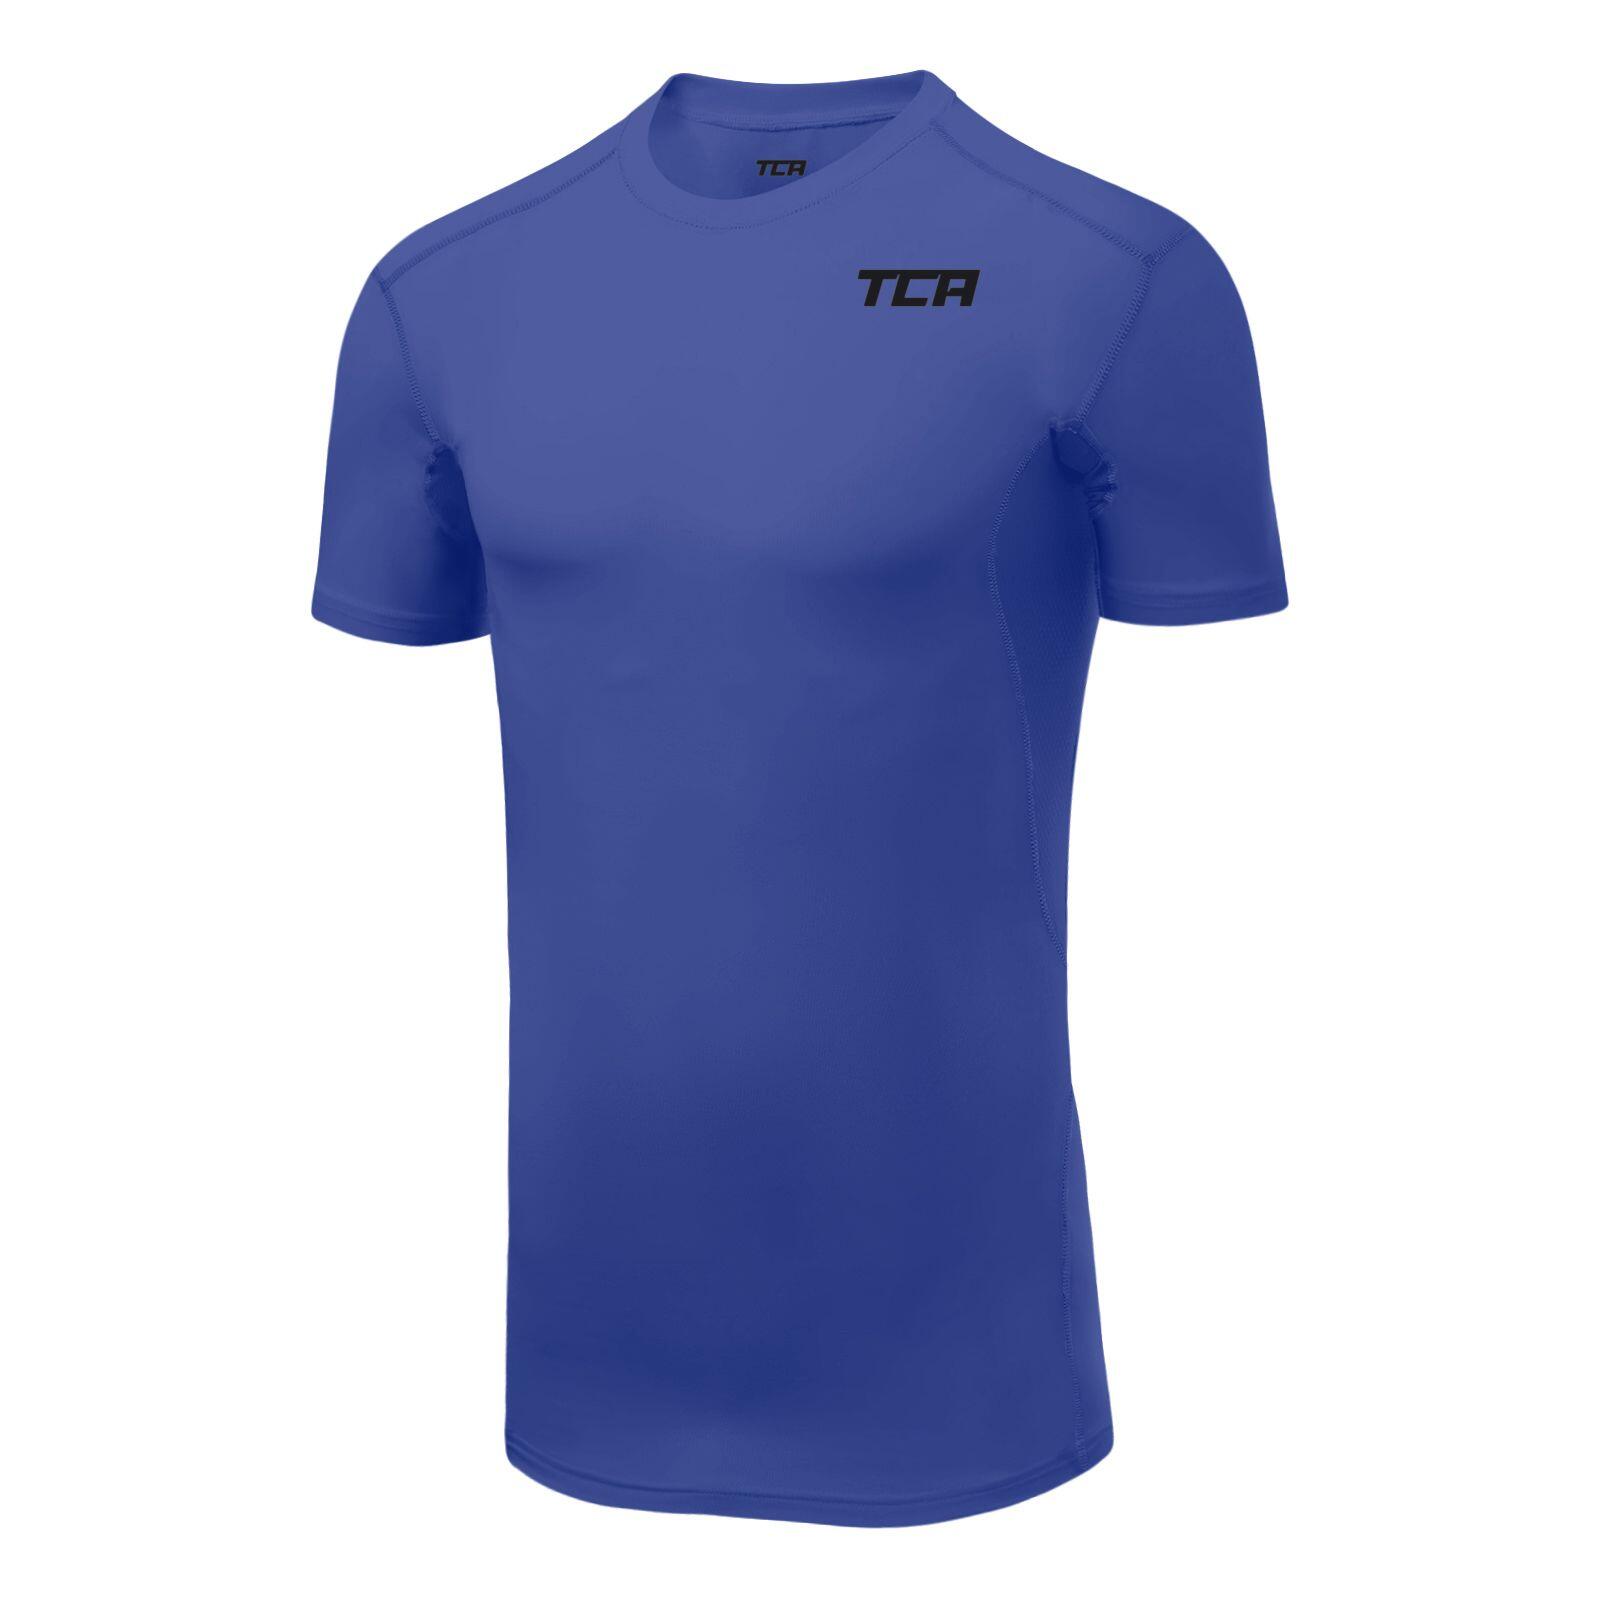 TCA Boys' HyperFusion Breathable Base Layer Compression T-shirt - Dazzling Blue